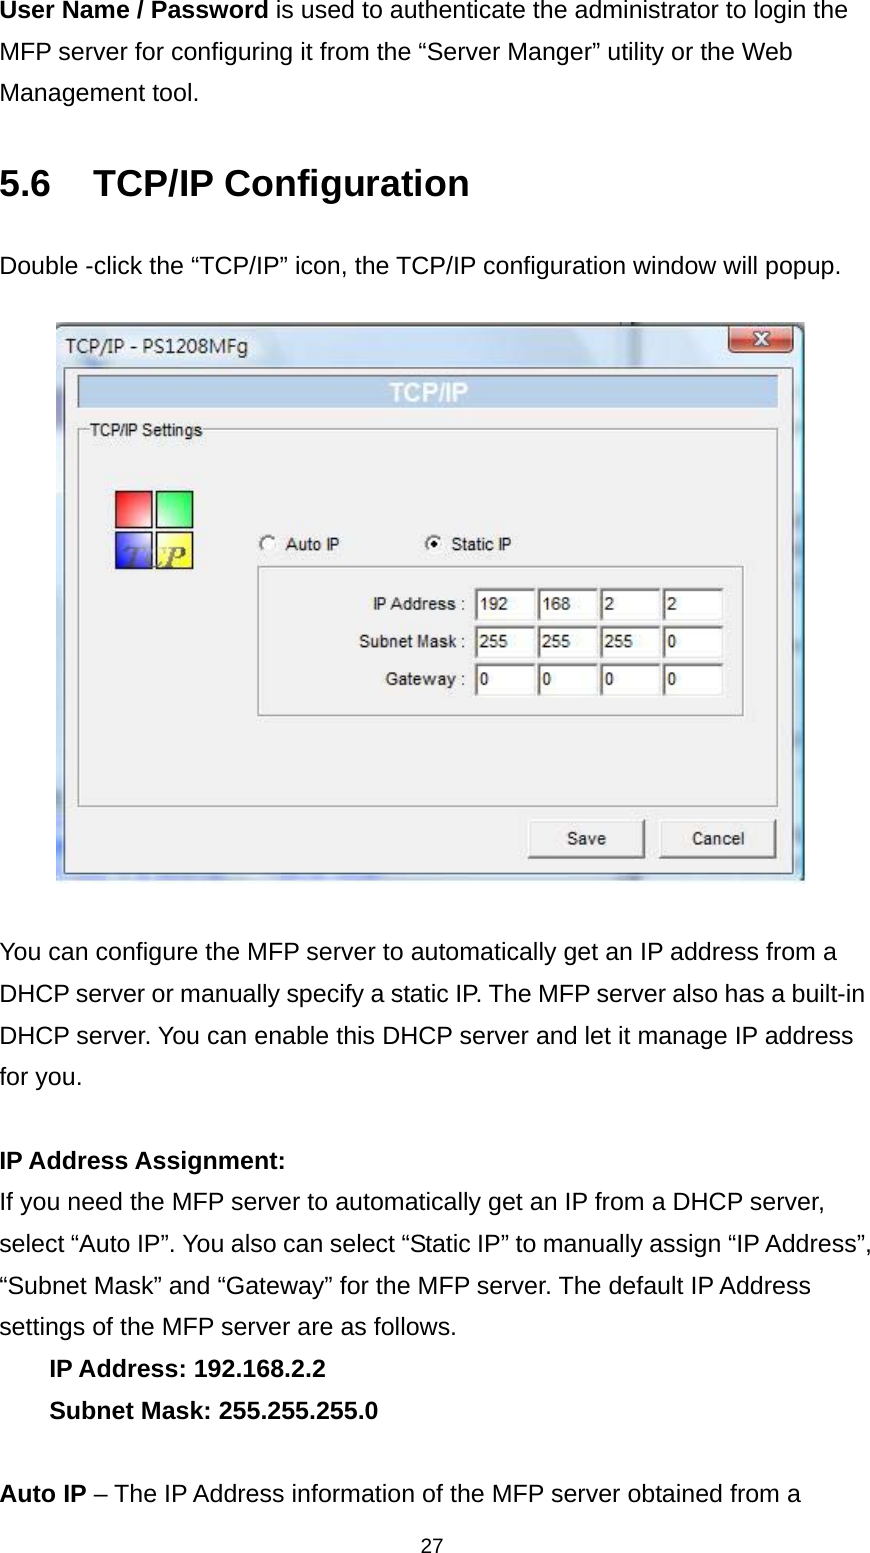 27 User Name / Password is used to authenticate the administrator to login the MFP server for configuring it from the “Server Manger” utility or the Web Management tool.  5.6 TCP/IP Configuration Double -click the “TCP/IP” icon, the TCP/IP configuration window will popup.    You can configure the MFP server to automatically get an IP address from a DHCP server or manually specify a static IP. The MFP server also has a built-in DHCP server. You can enable this DHCP server and let it manage IP address for you.  IP Address Assignment:   If you need the MFP server to automatically get an IP from a DHCP server, select “Auto IP”. You also can select “Static IP” to manually assign “IP Address”, “Subnet Mask” and “Gateway” for the MFP server. The default IP Address settings of the MFP server are as follows. IP Address: 192.168.2.2 Subnet Mask: 255.255.255.0  Auto IP – The IP Address information of the MFP server obtained from a 